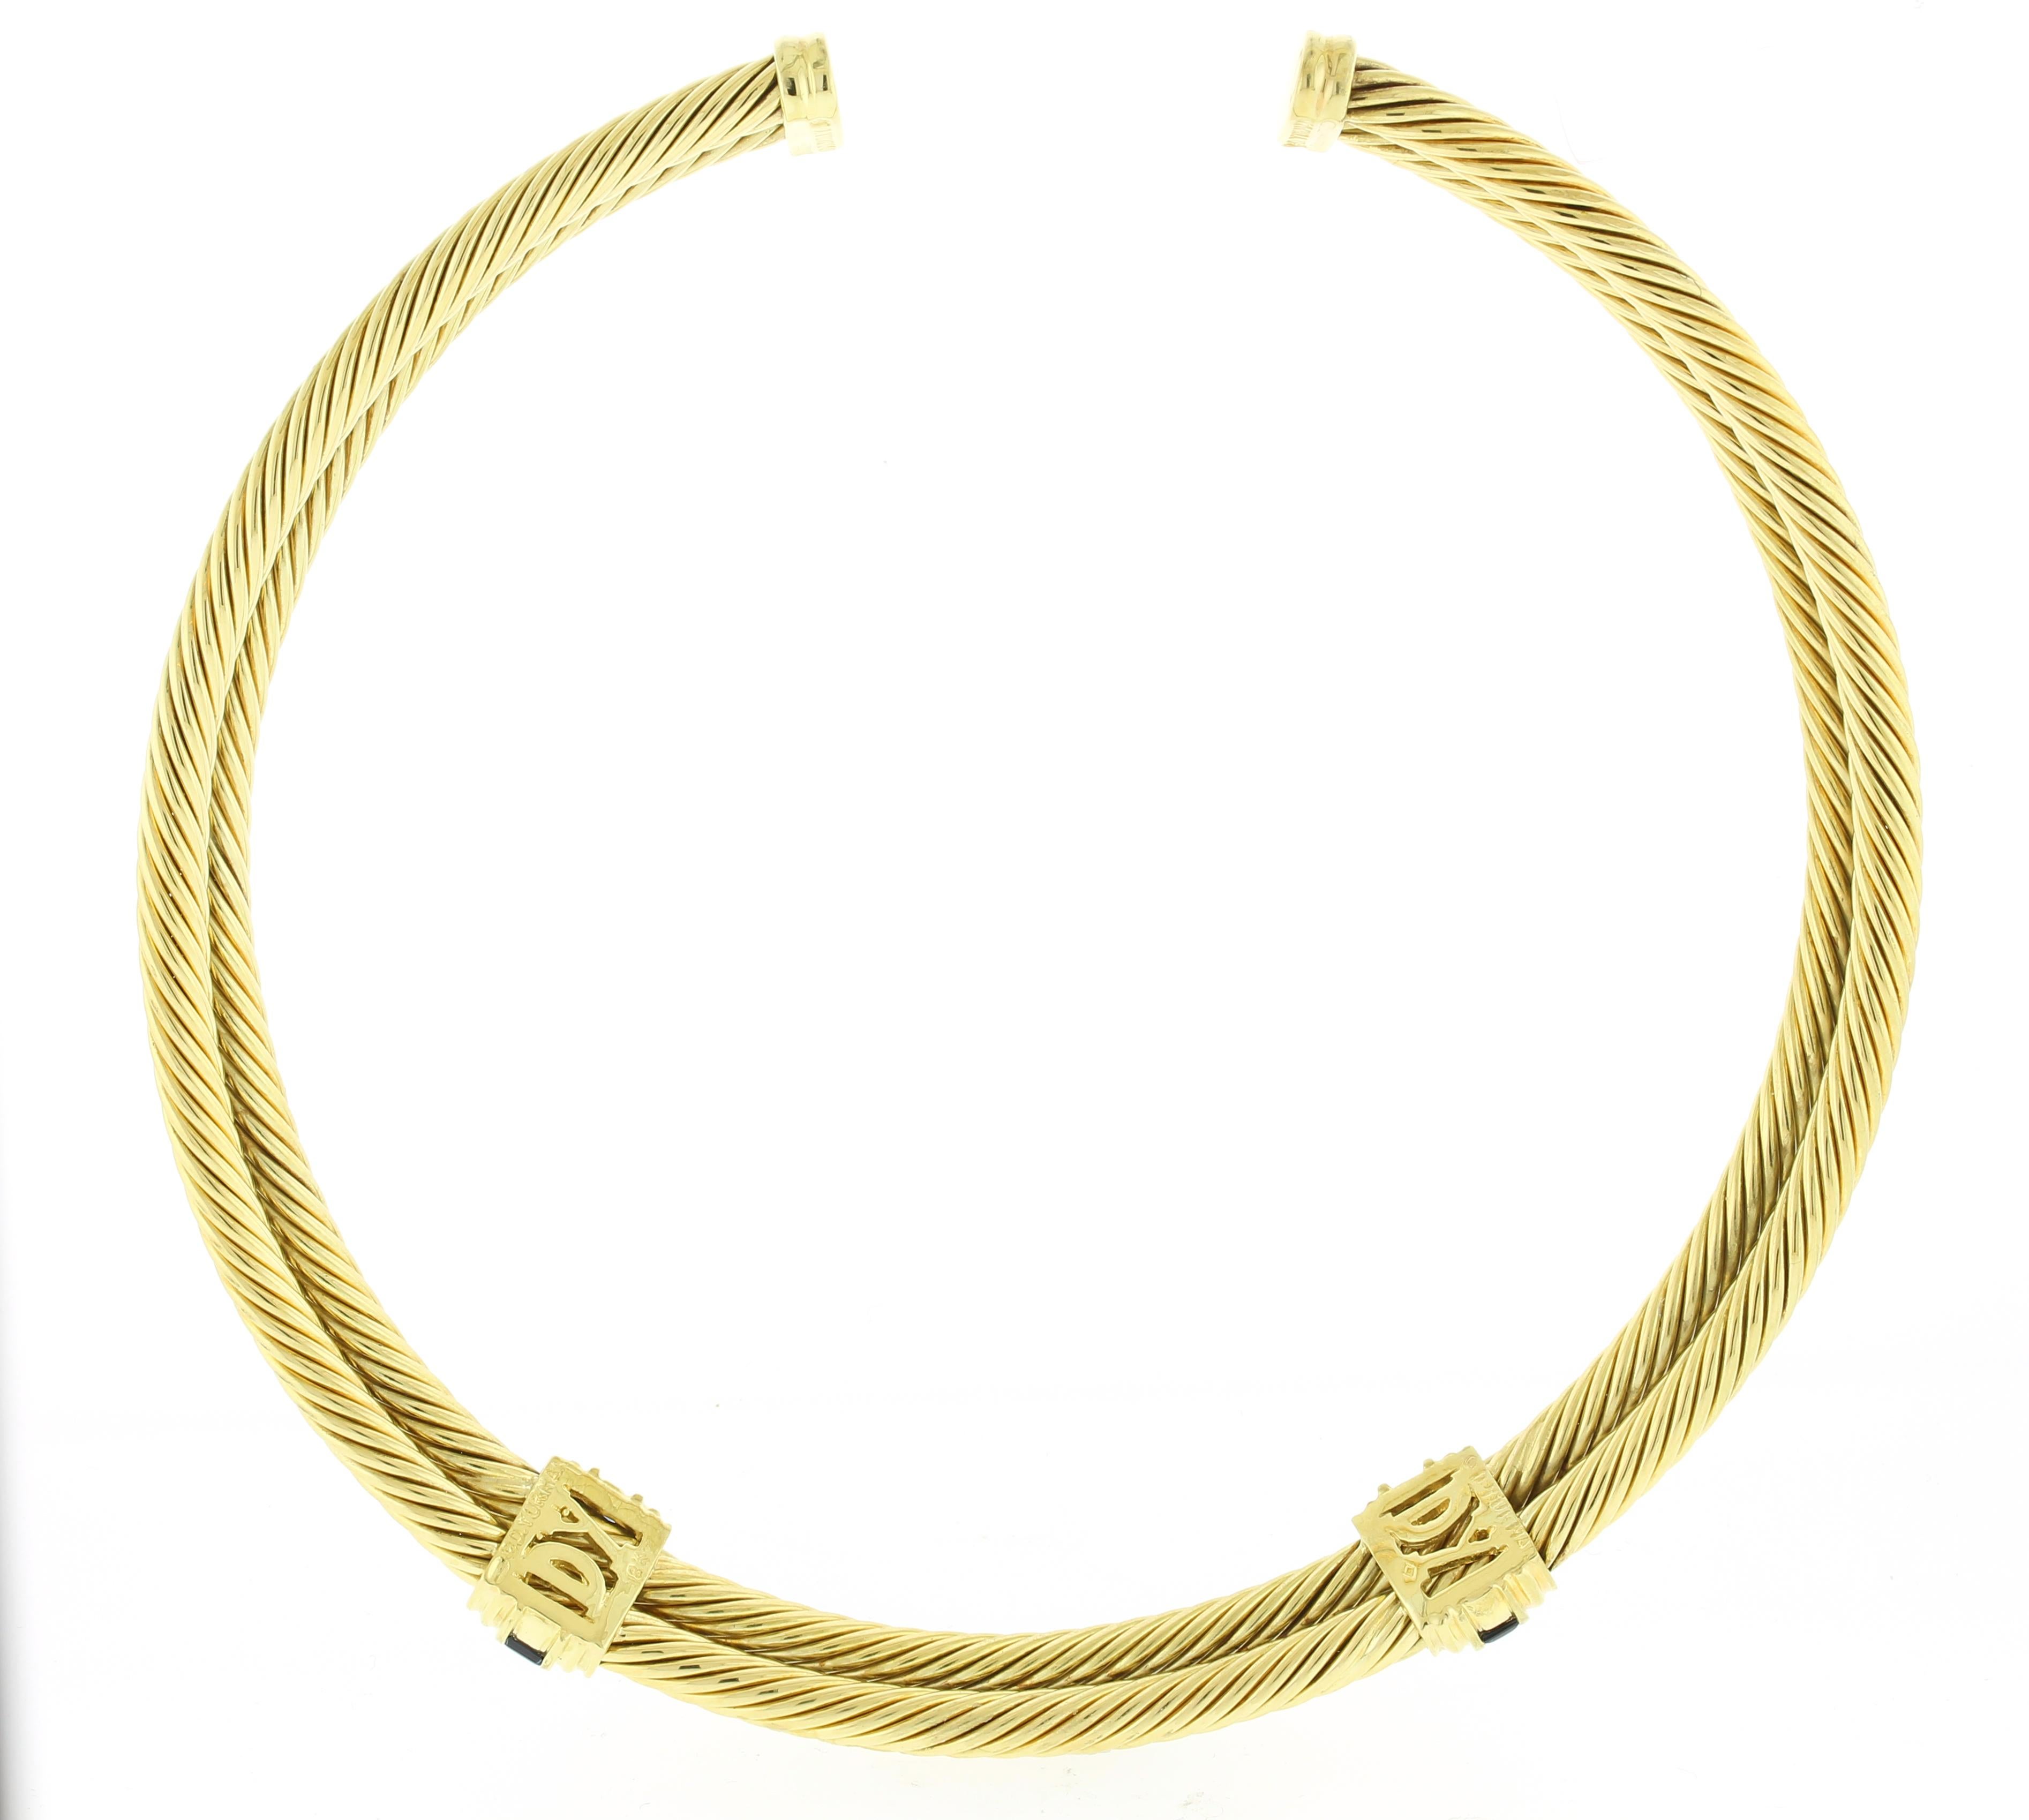 From David Yurman, this cable collar is easy to wear.
♦ Designer: David Yurman
♦ Metal: 18kt yellow gold
♦ Length: 16inches
♦ Gemstone: 10Sapphires= Approx 2.20cts
♦ Packaging: Pampillonia Presentation Box
♦ Condition: Excellent, pre-owned.